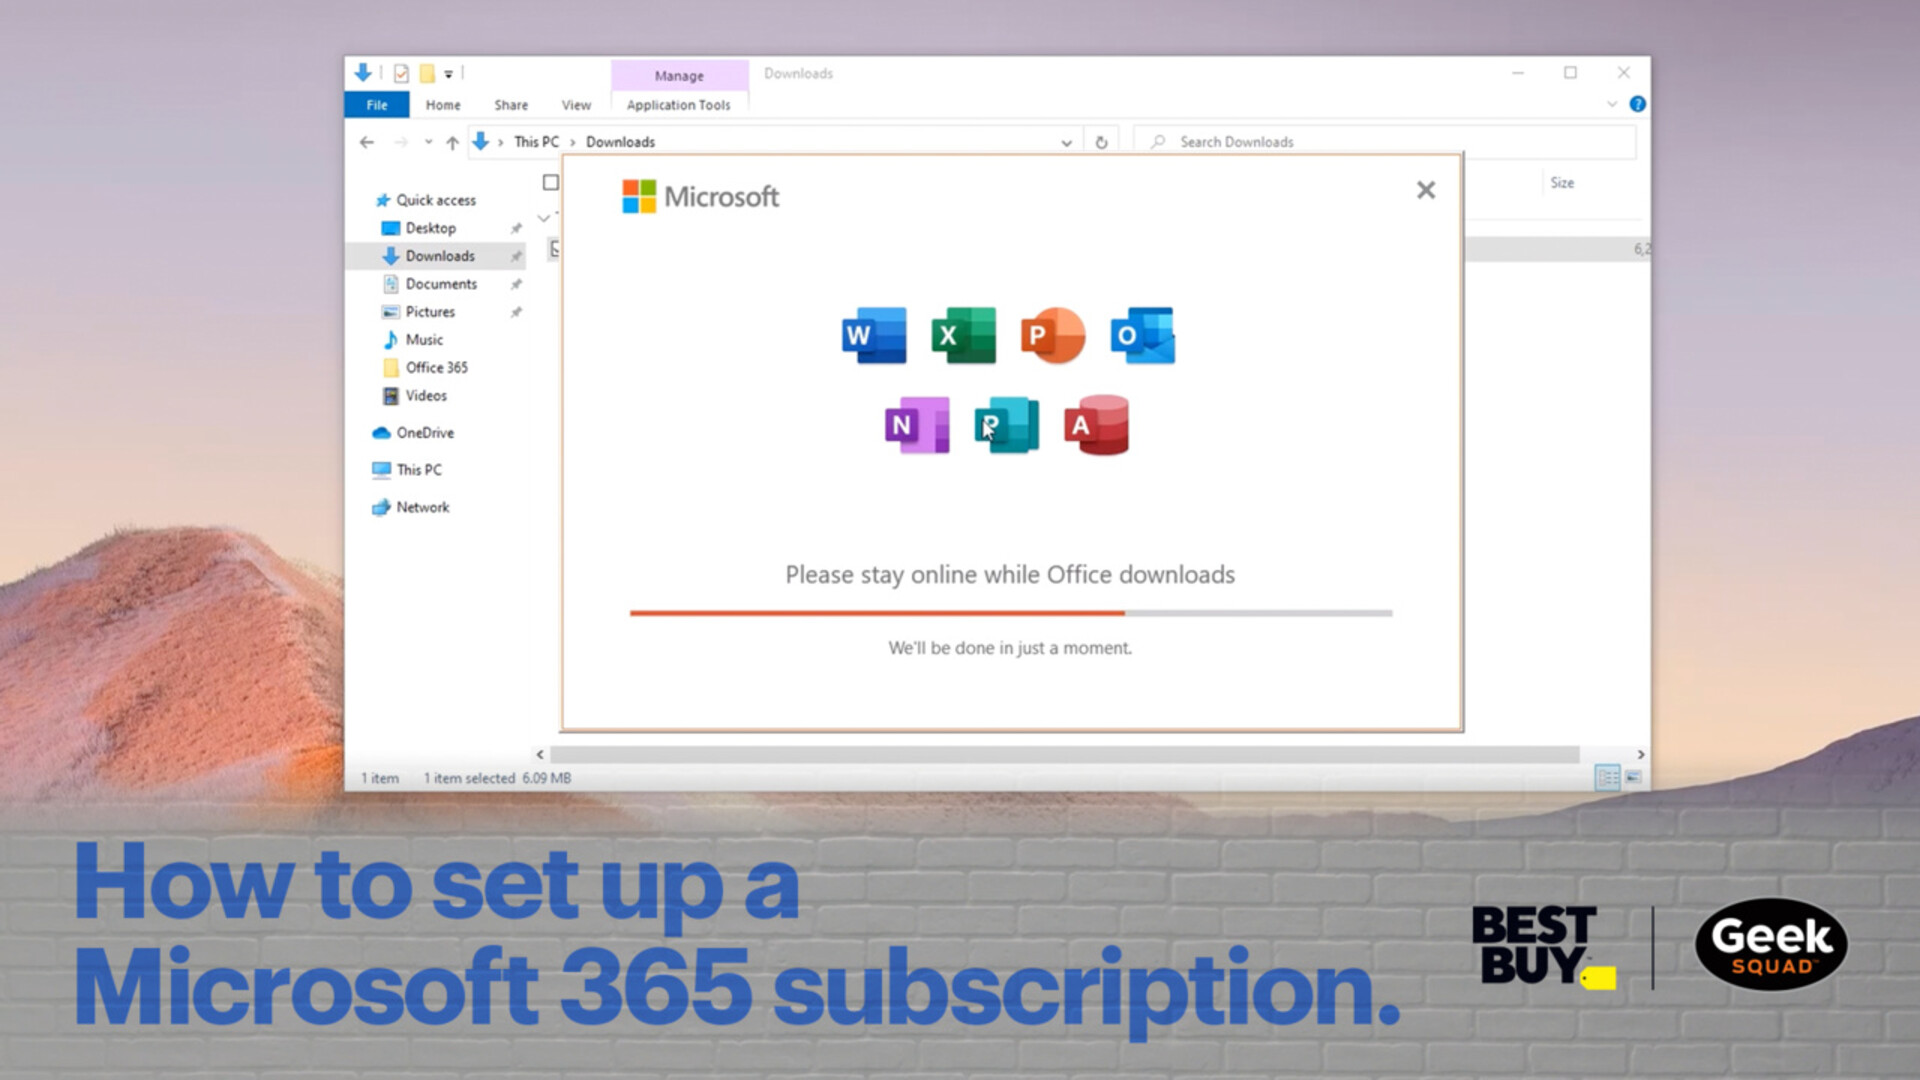 Microsoft 365 Personal (One-Year Subscription) - Apple